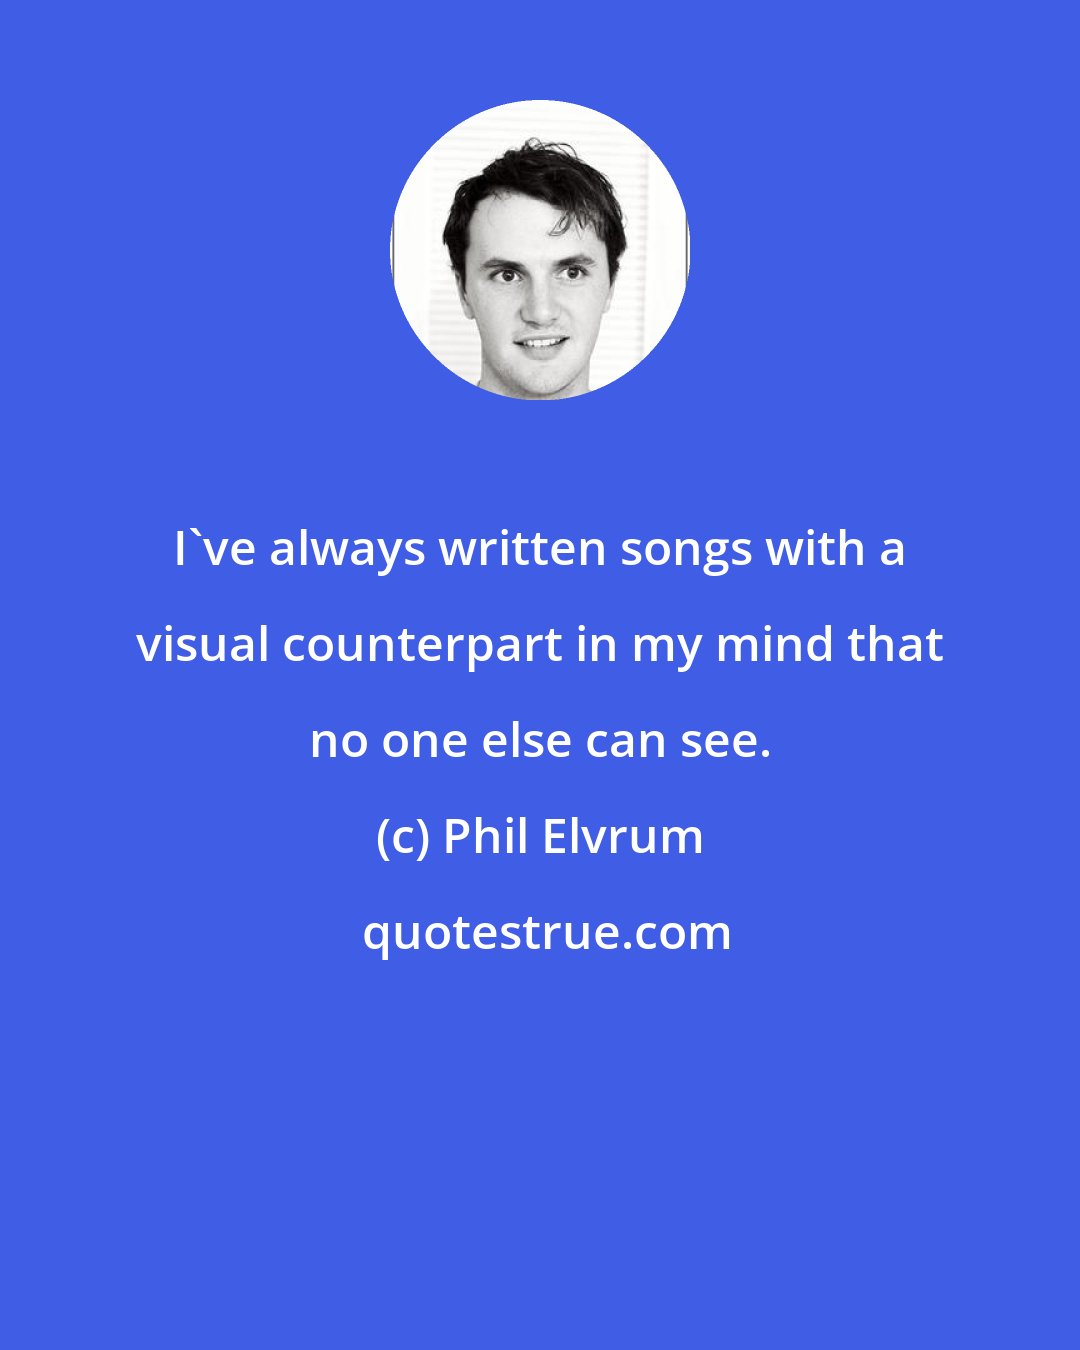 Phil Elvrum: I've always written songs with a visual counterpart in my mind that no one else can see.